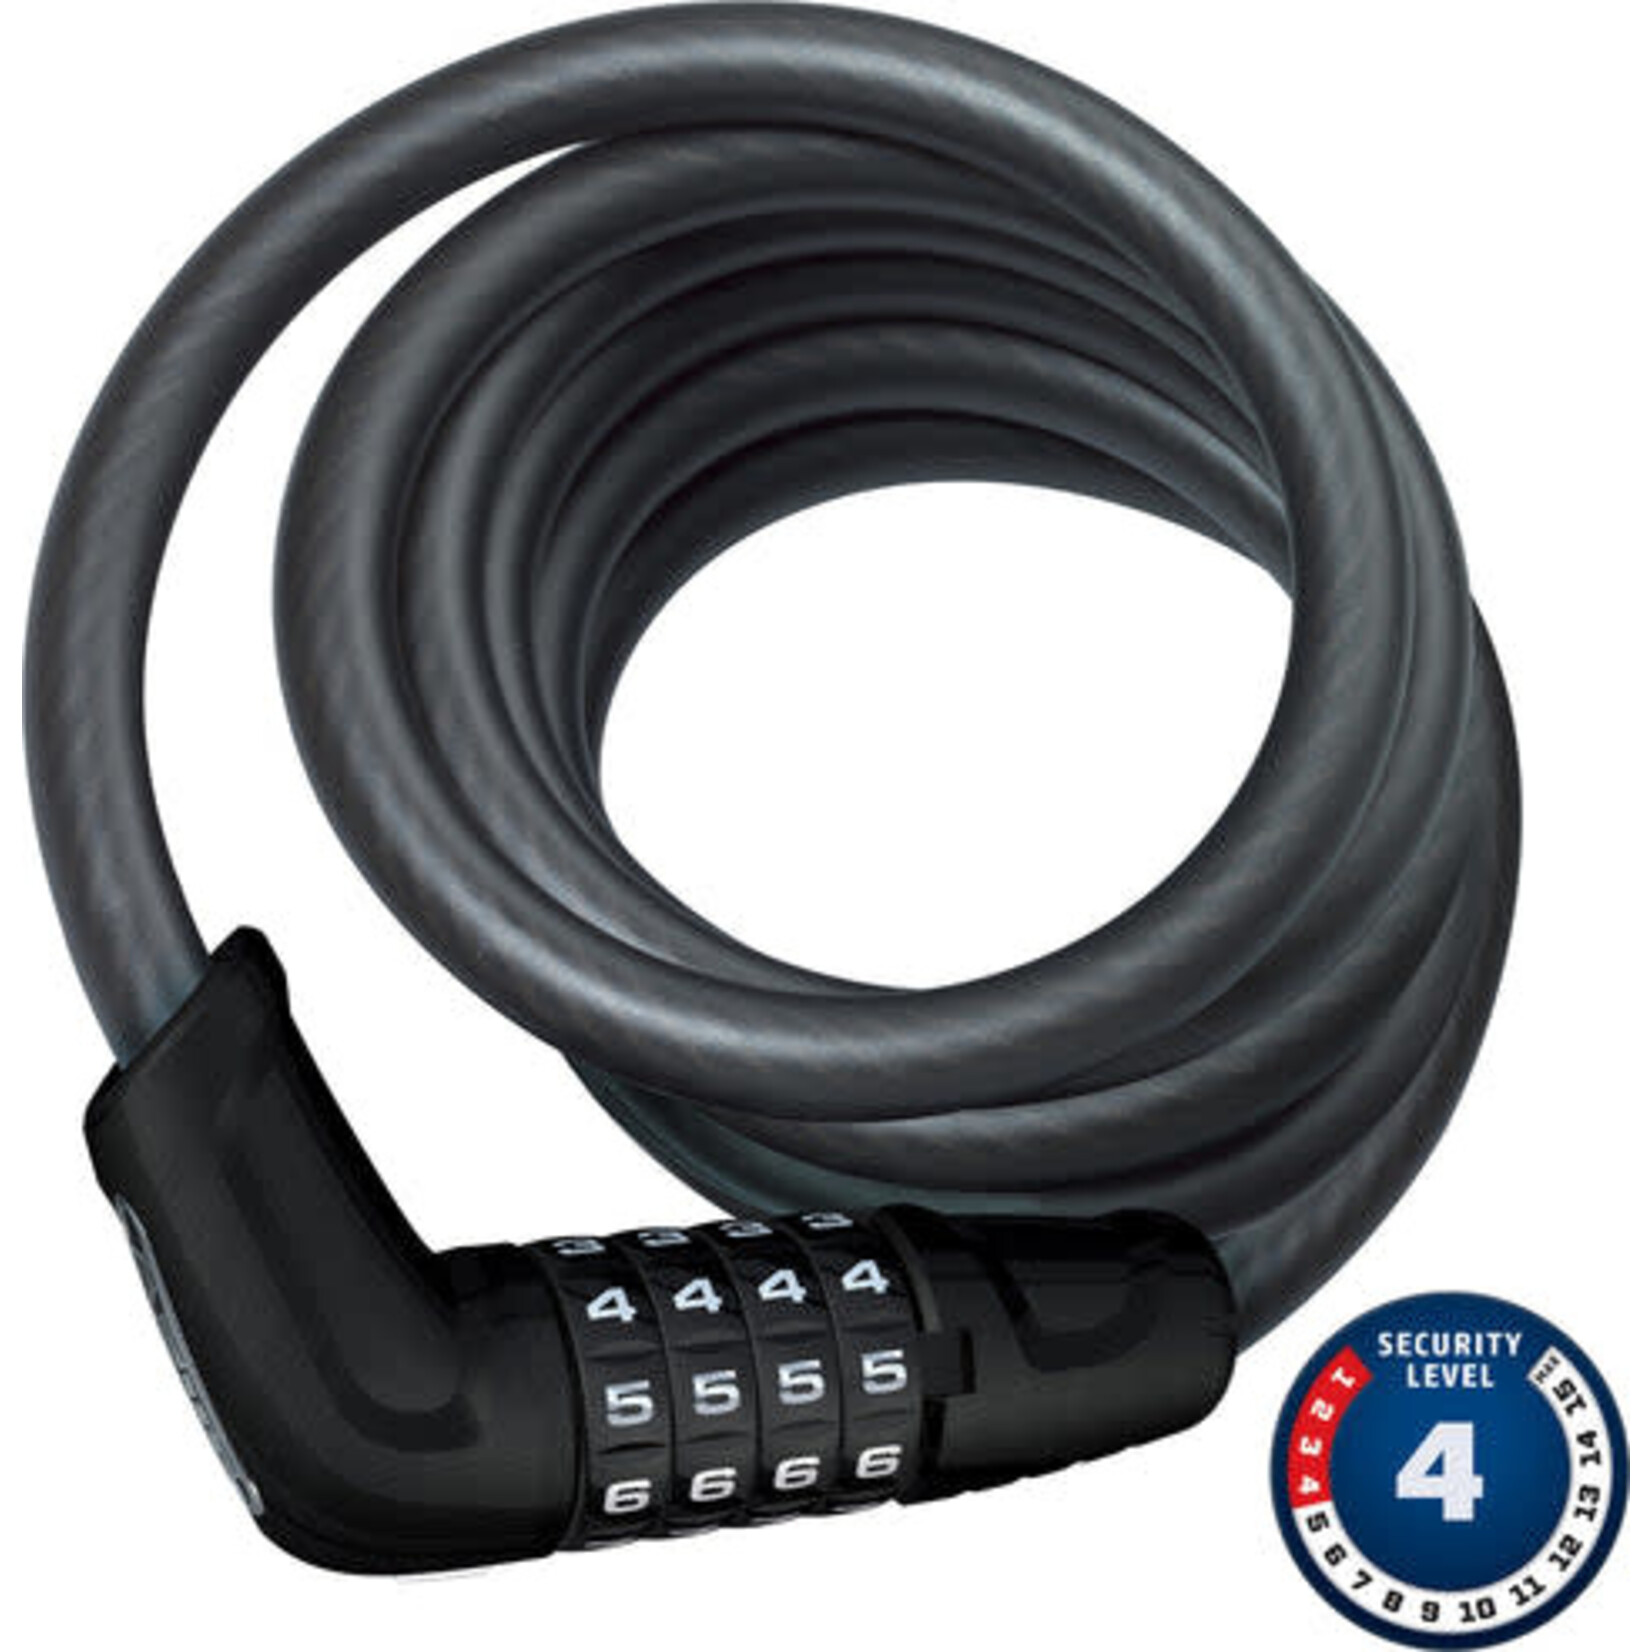 Abus Abus, Tresr 6512C, Cable with 4 digit cmbinatin lck, 12mm x 180cm (12mm x 5.9')